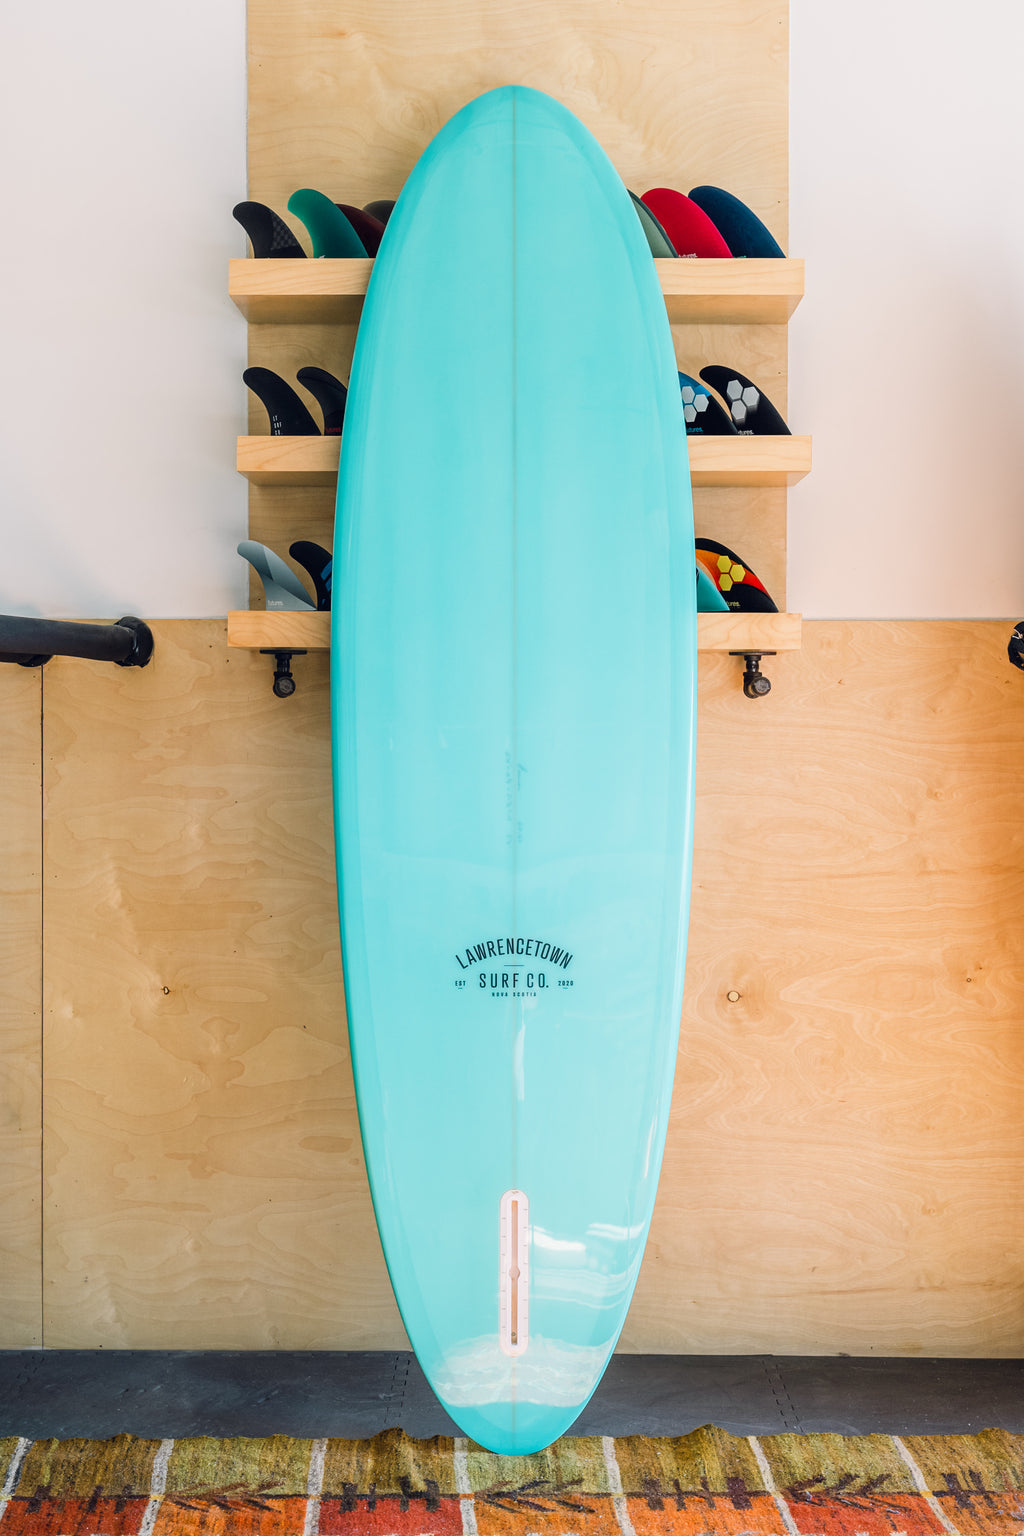 Lawrencetown Surf Co. - 6'10 Classic Egg